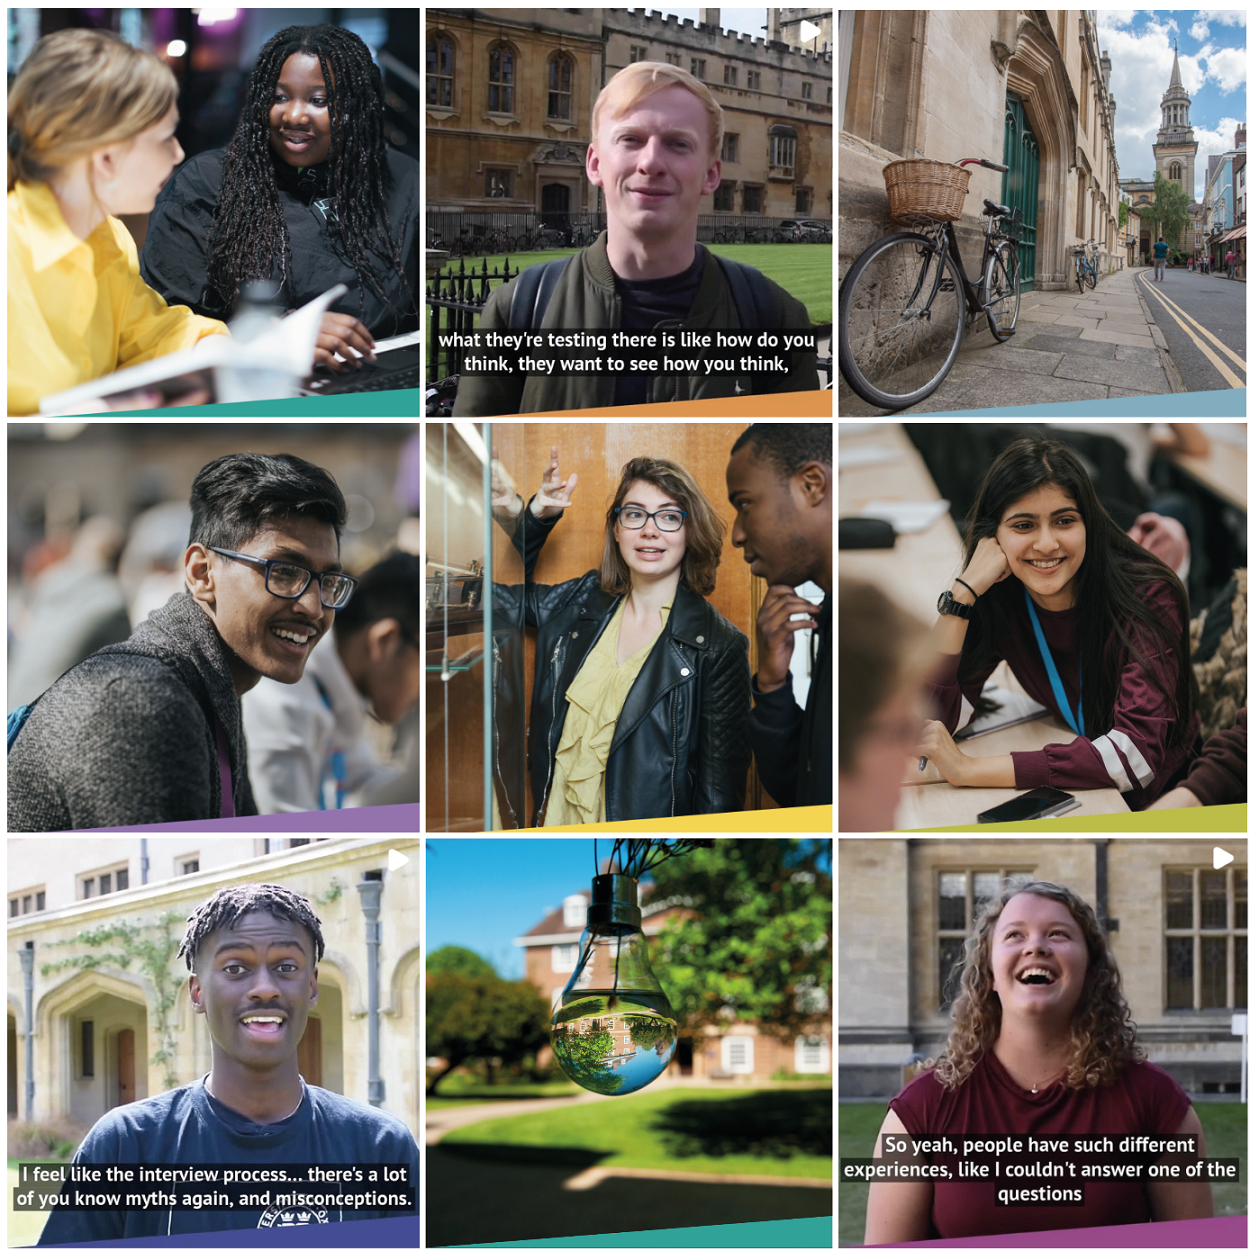 A 3x3 instagram grid showing a variety of different students and Oxford locations